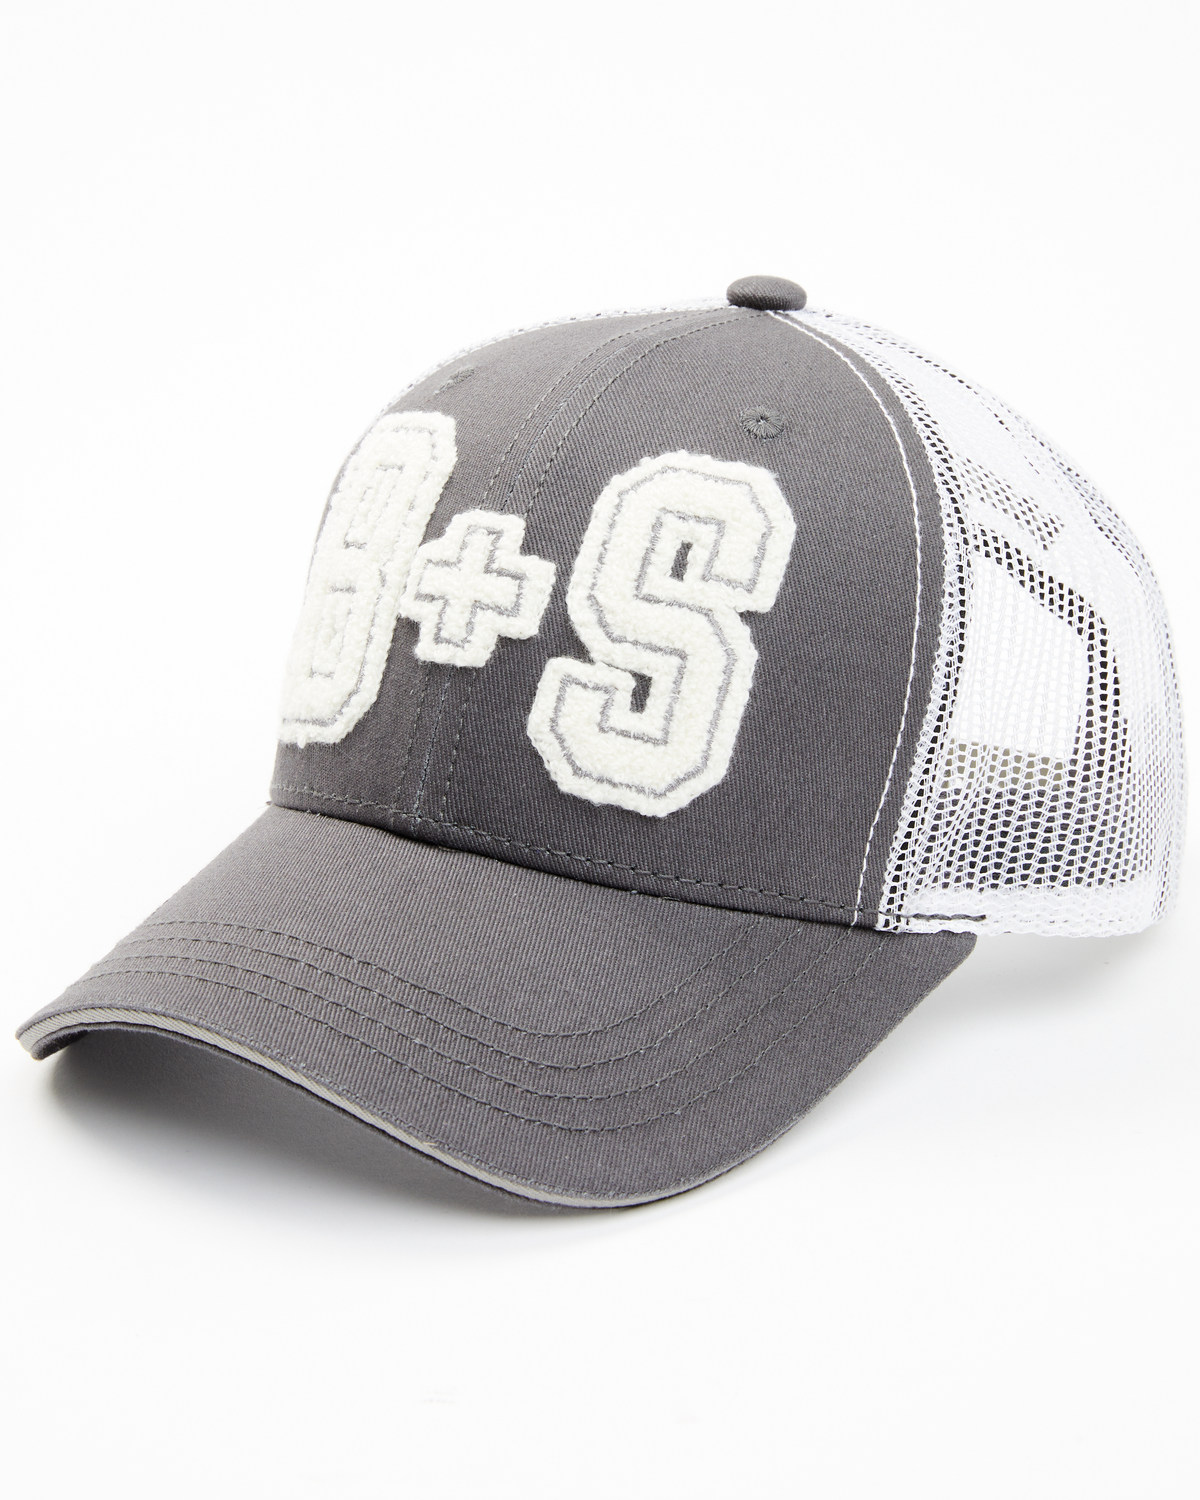 Brothers and Sons Men's Varsity Patch Baseball Cap